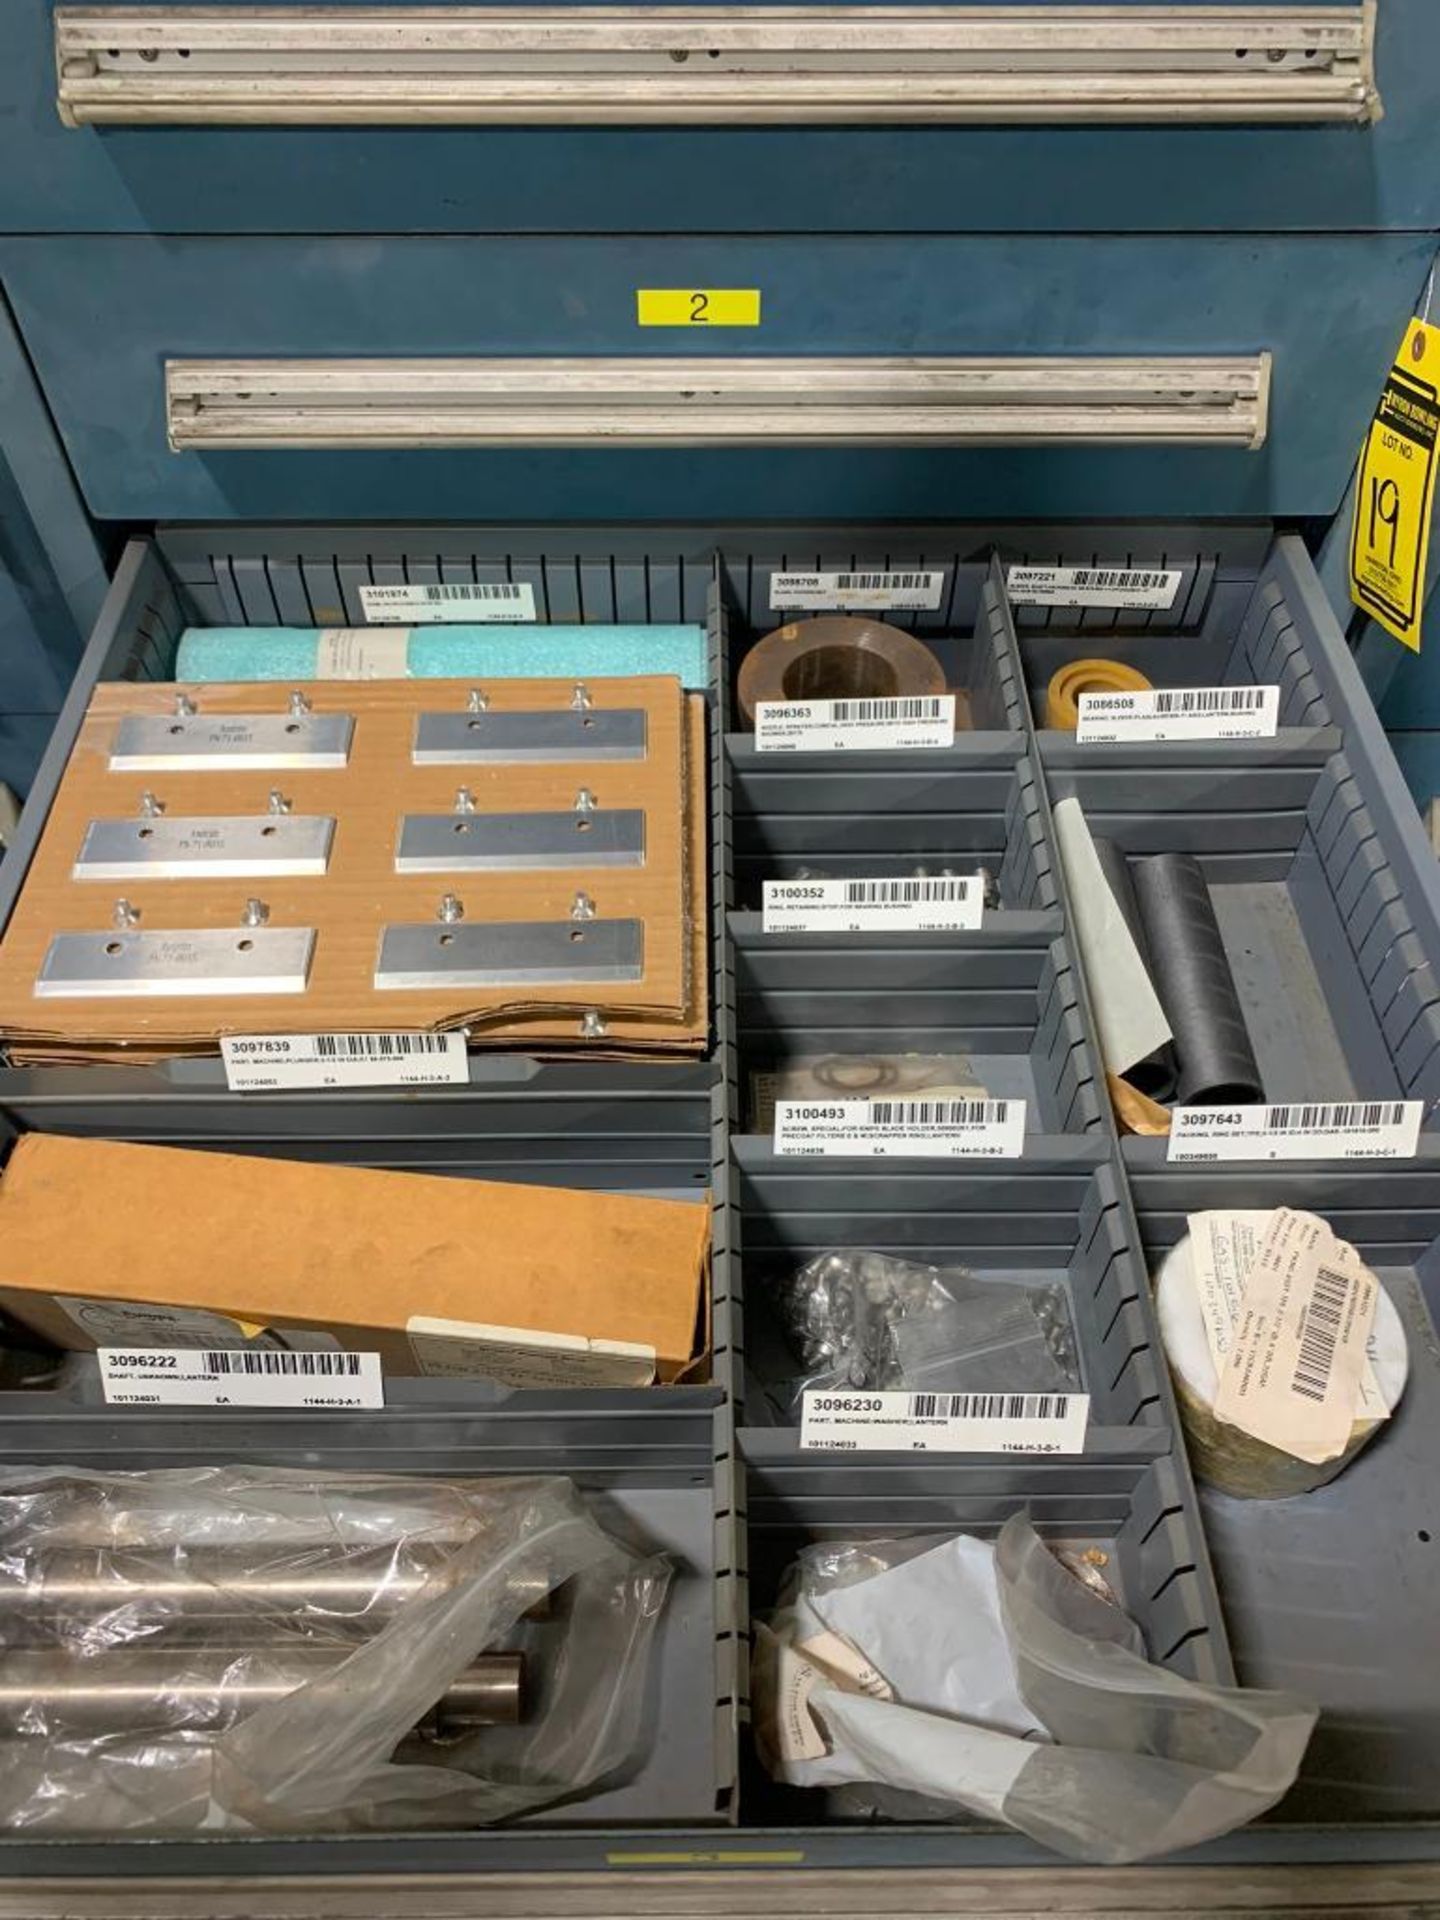 Stanley Vidmar 8-Drawer Cabinet w/ Assorted Switches, Burners, Ignitors, Analyzers, Plungers, Assort - Image 4 of 9